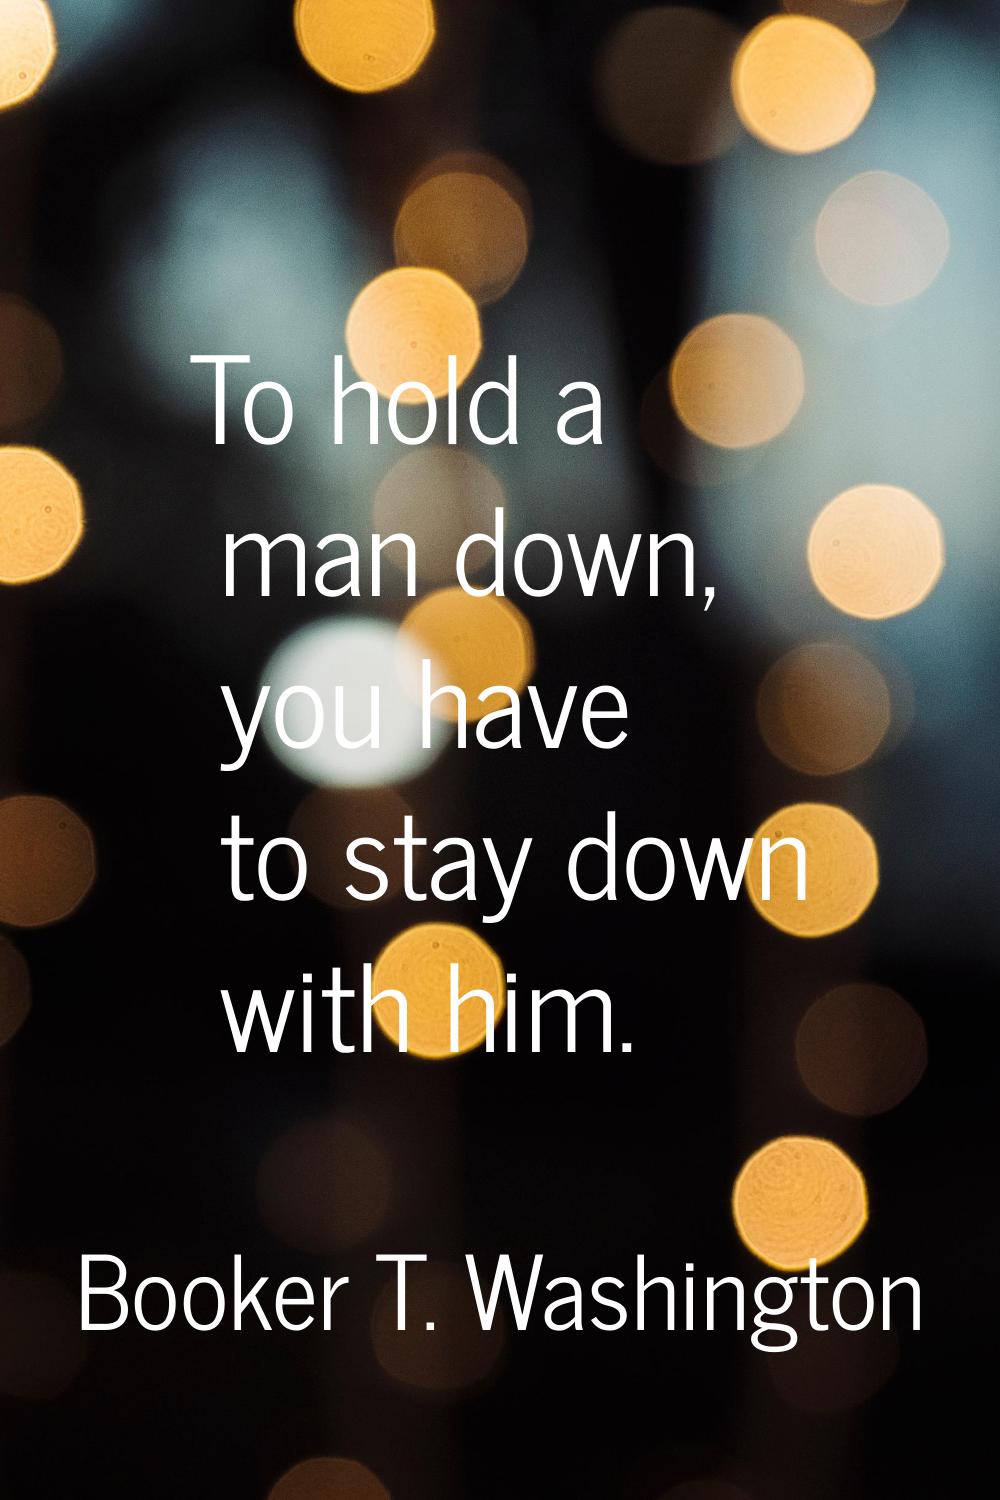 To hold a man down, you have to stay down with him.